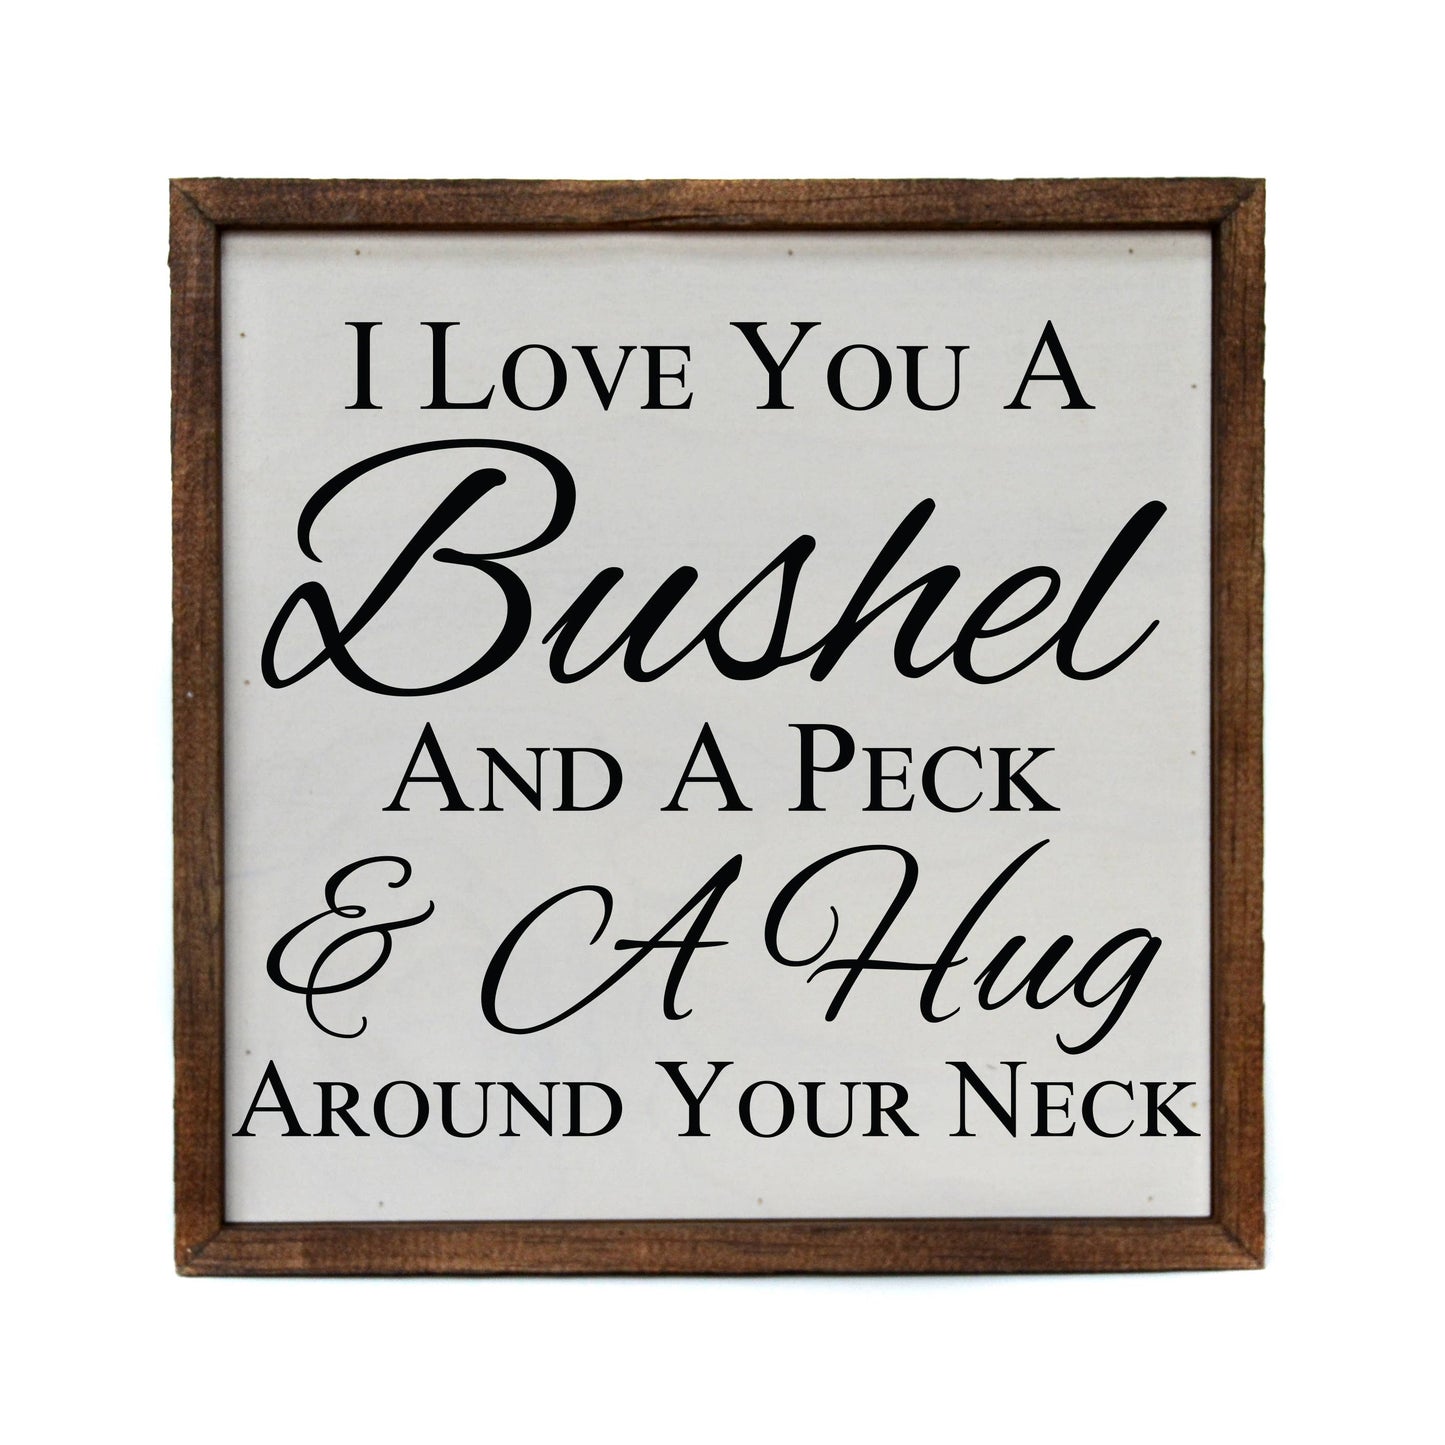 I Love You A Bushel And A Peck 10x10in Wooden Sign